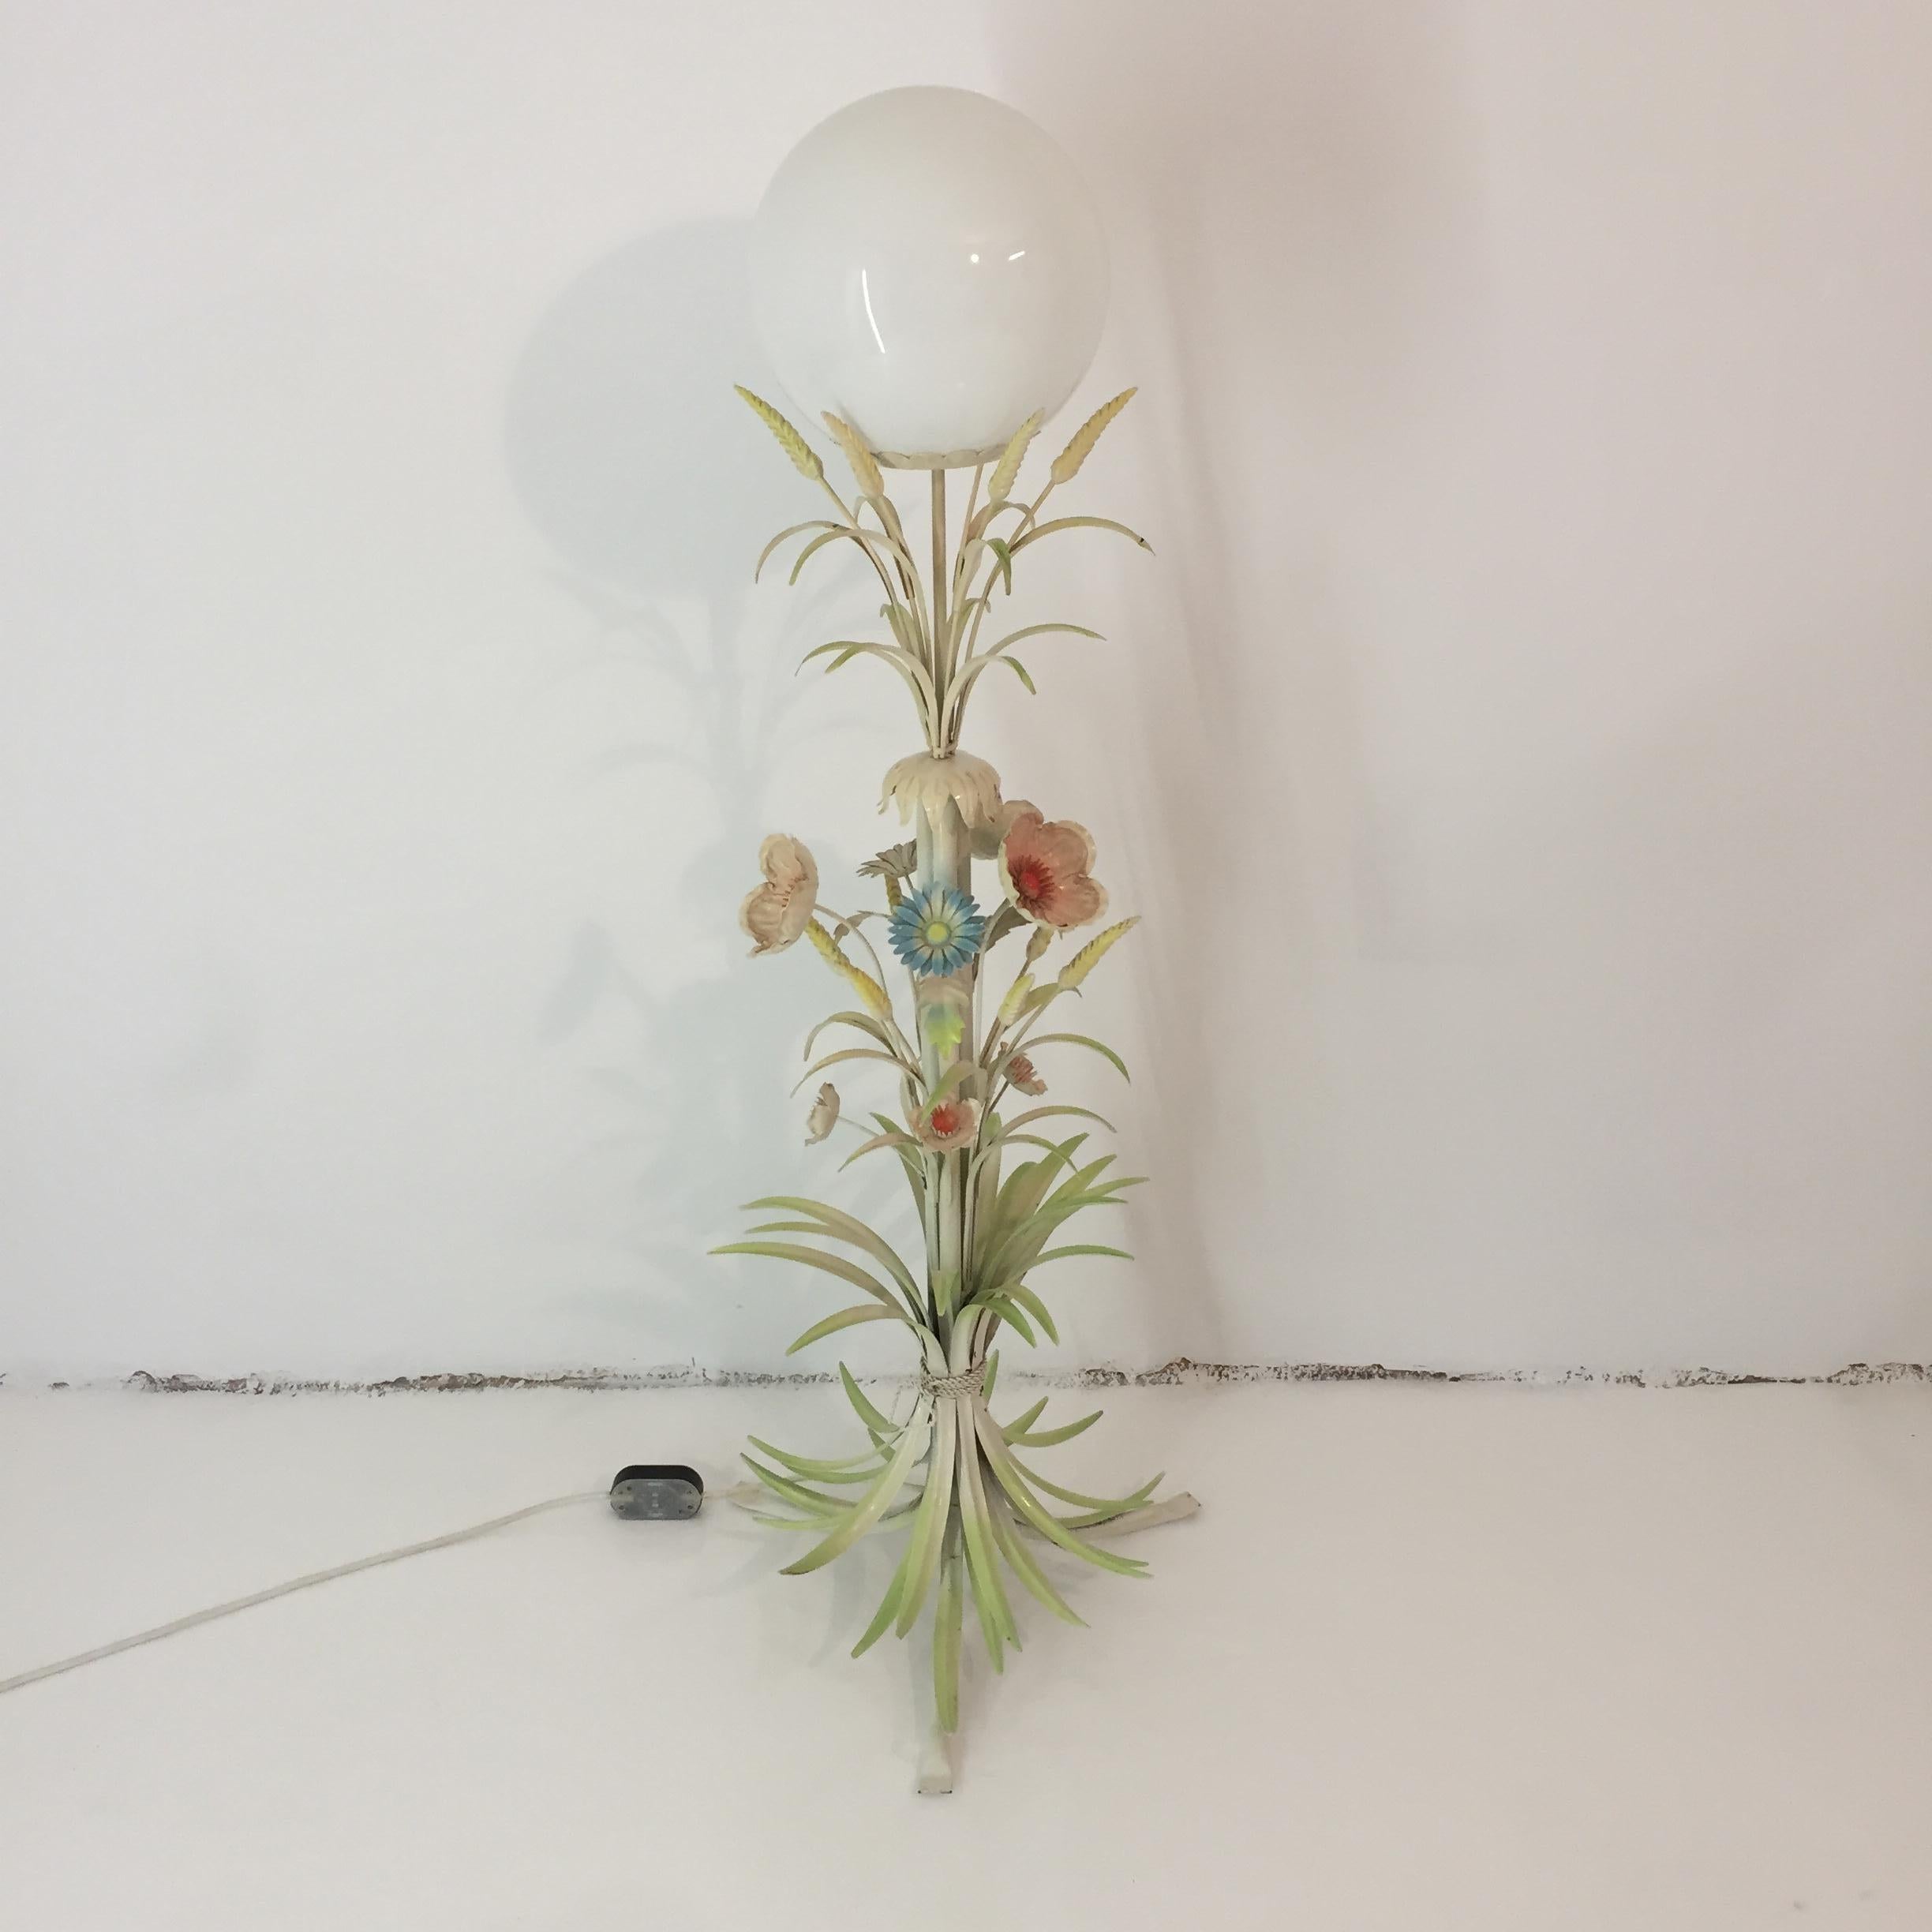 Flower Bouquet Pastel Floor Lamp 1960s Vintage Italian Sheaf Of Wheat MidCentury In Good Condition For Sale In London, GB